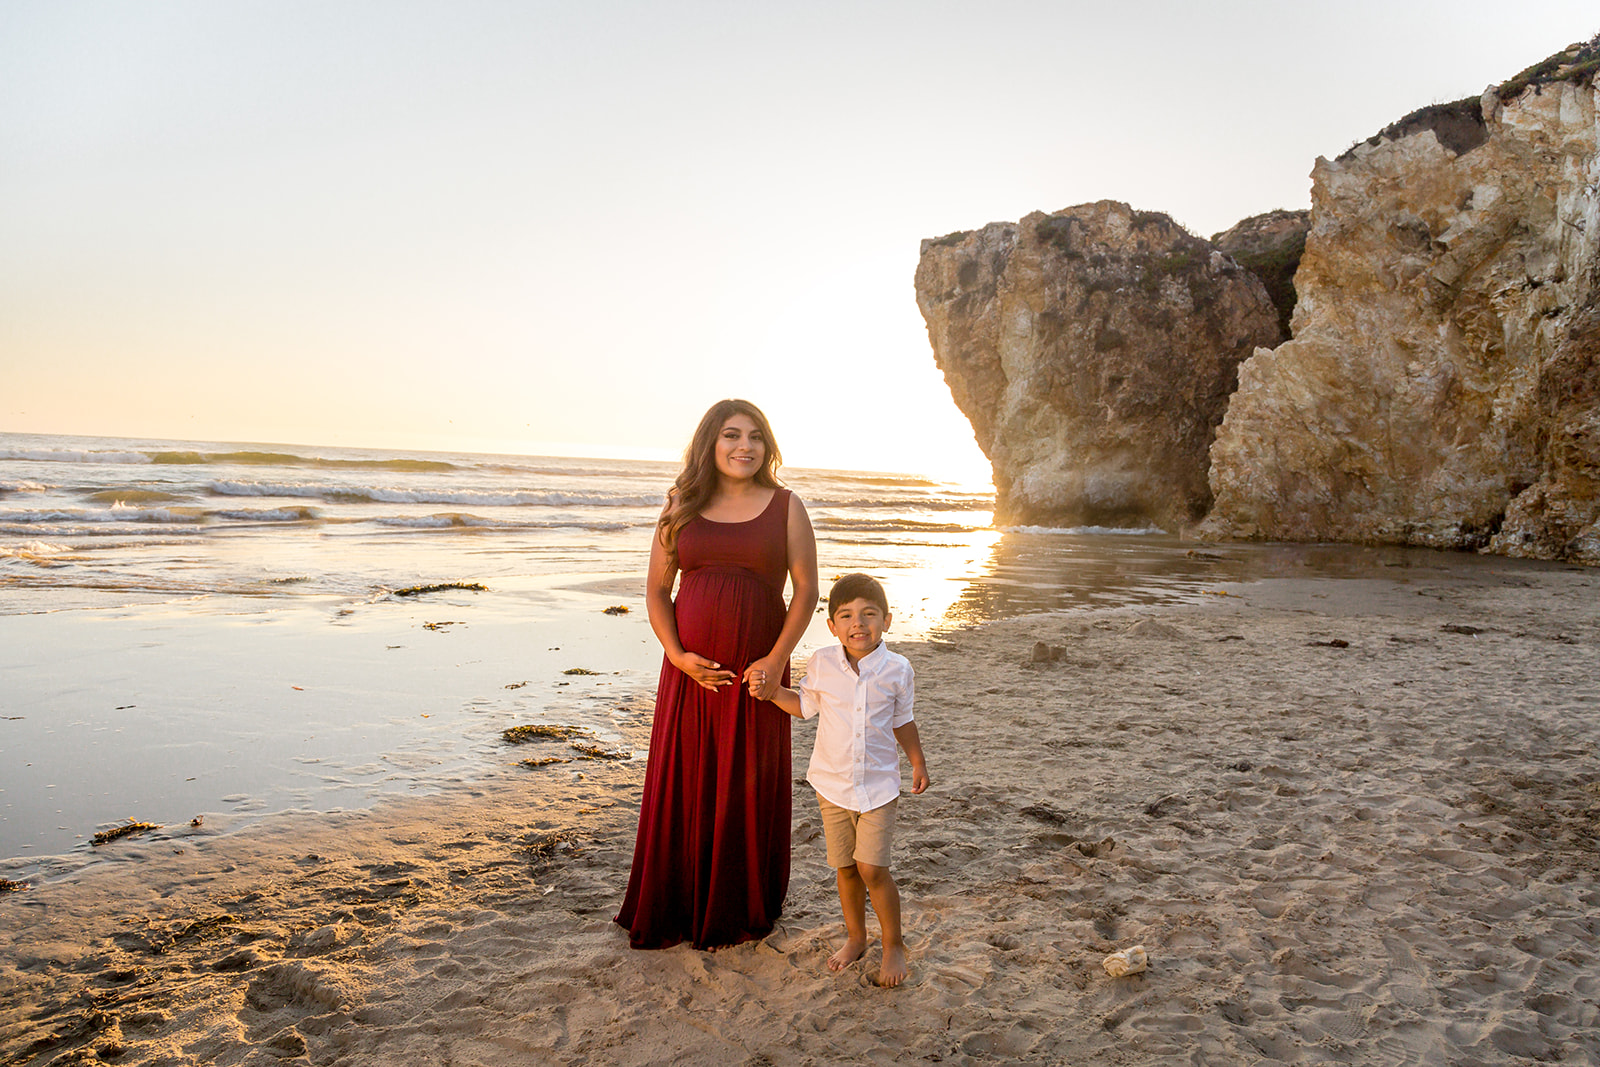 Mom and son photoshoot in pismo beach